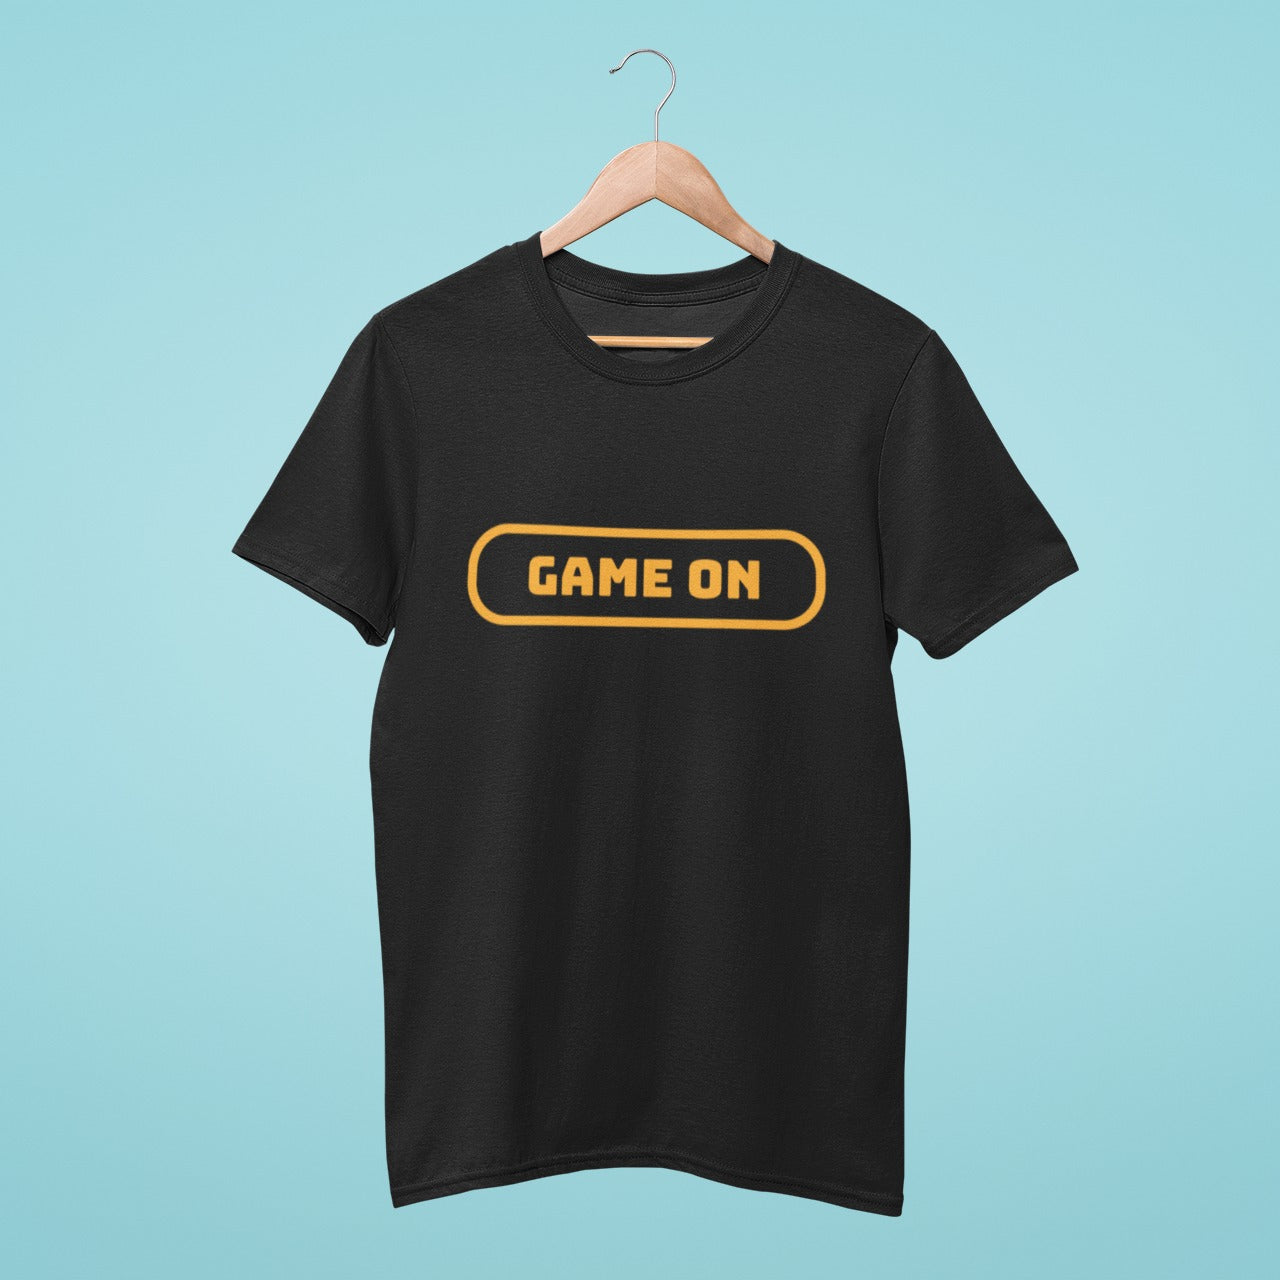 Get your game on with our stylish black t-shirt featuring "Game On" written in orange gaming button style. Made with high-quality materials, this comfortable and durable t-shirt is perfect for everyday wear or gaming events. Show off your love for gaming with our Game On t-shirt. Order yours today and level up your wardrobe!